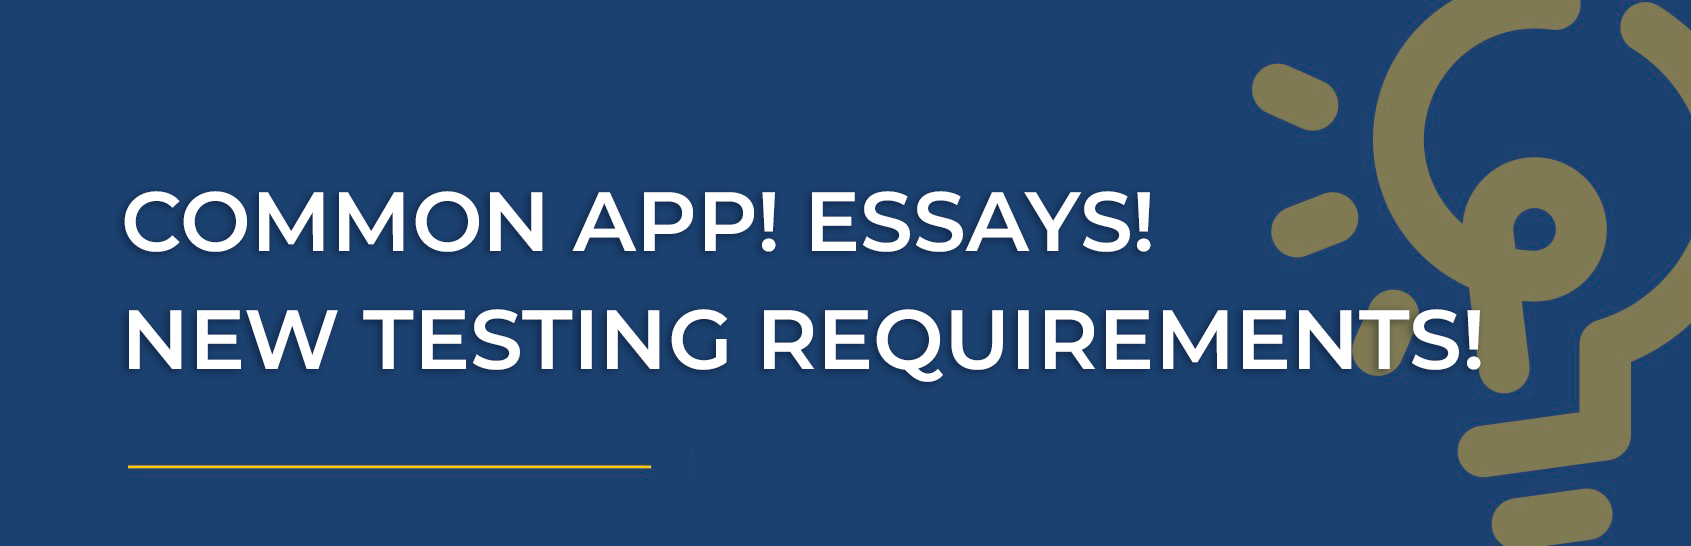 Common App! Essays! New Testing Requirements!